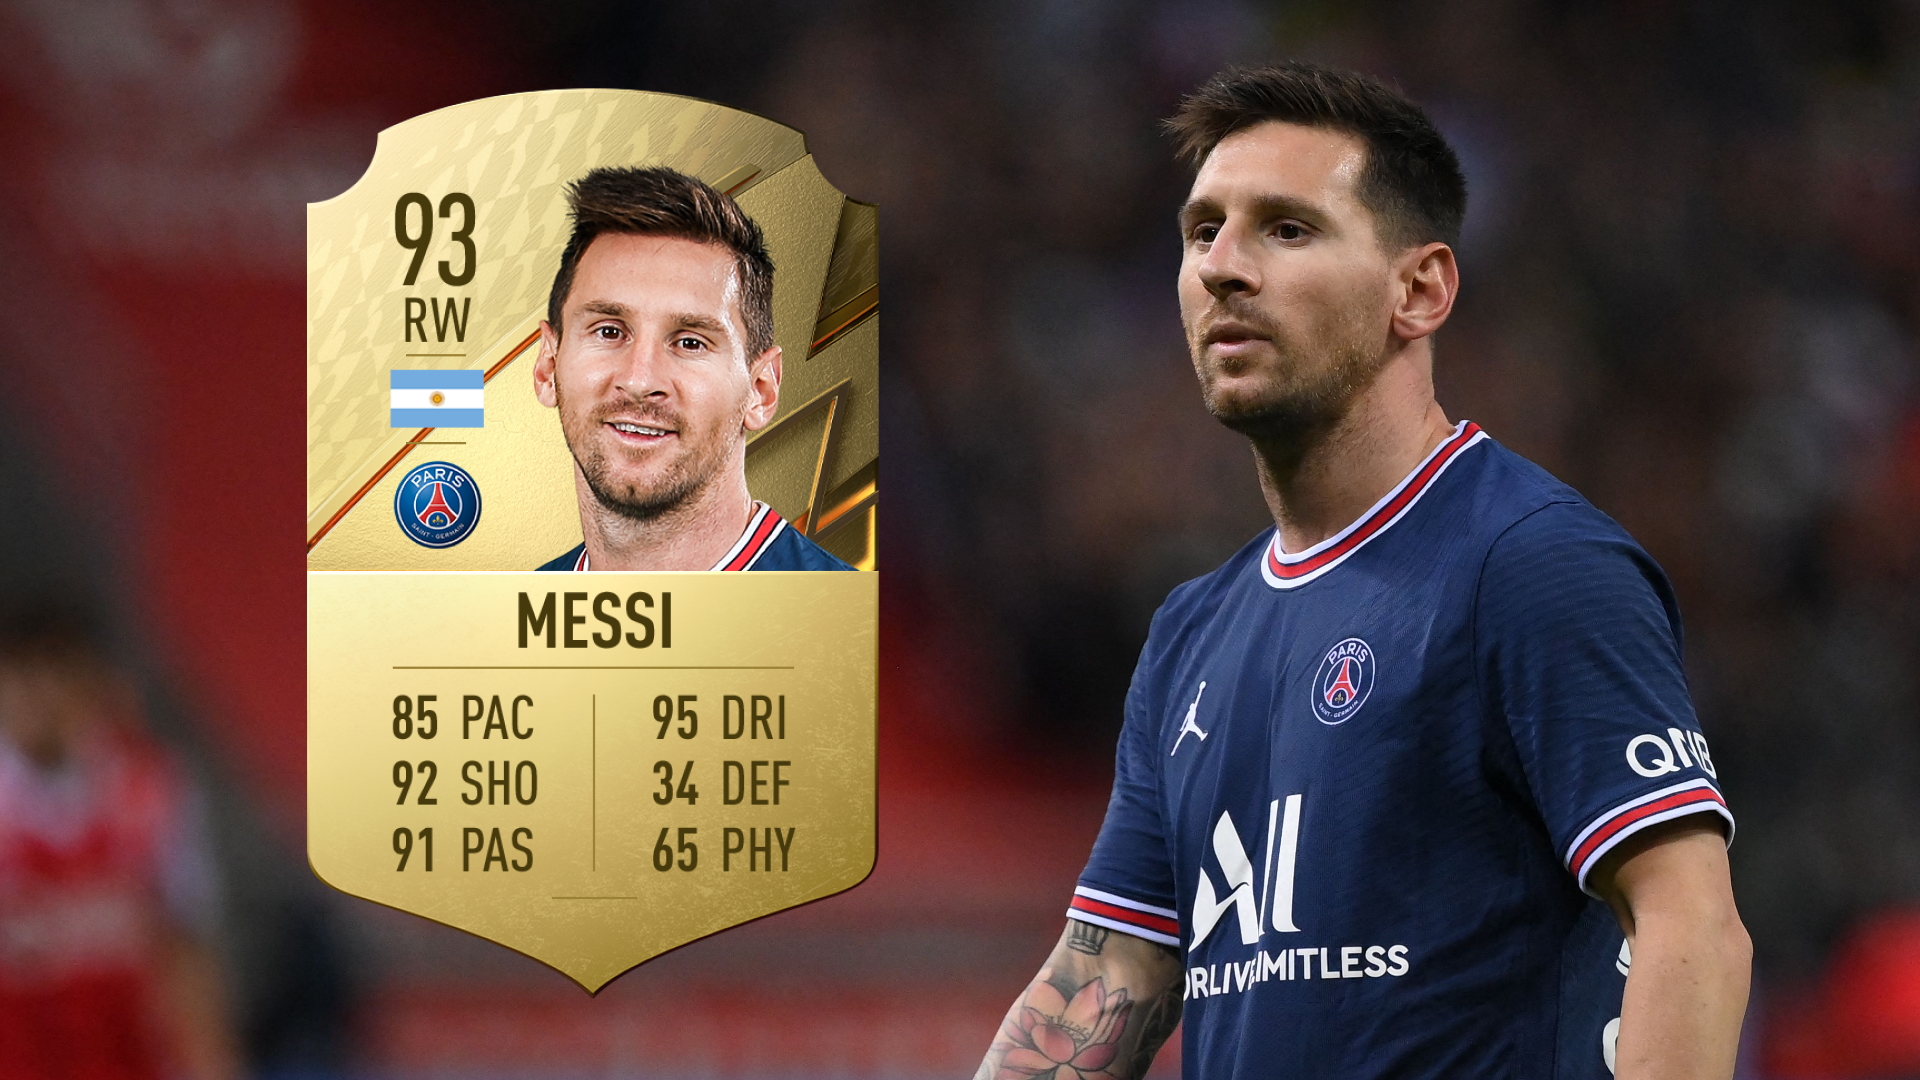 FIFA 22: Messi confirmed as highest rated player as PSG star edges Ronaldo to top spot